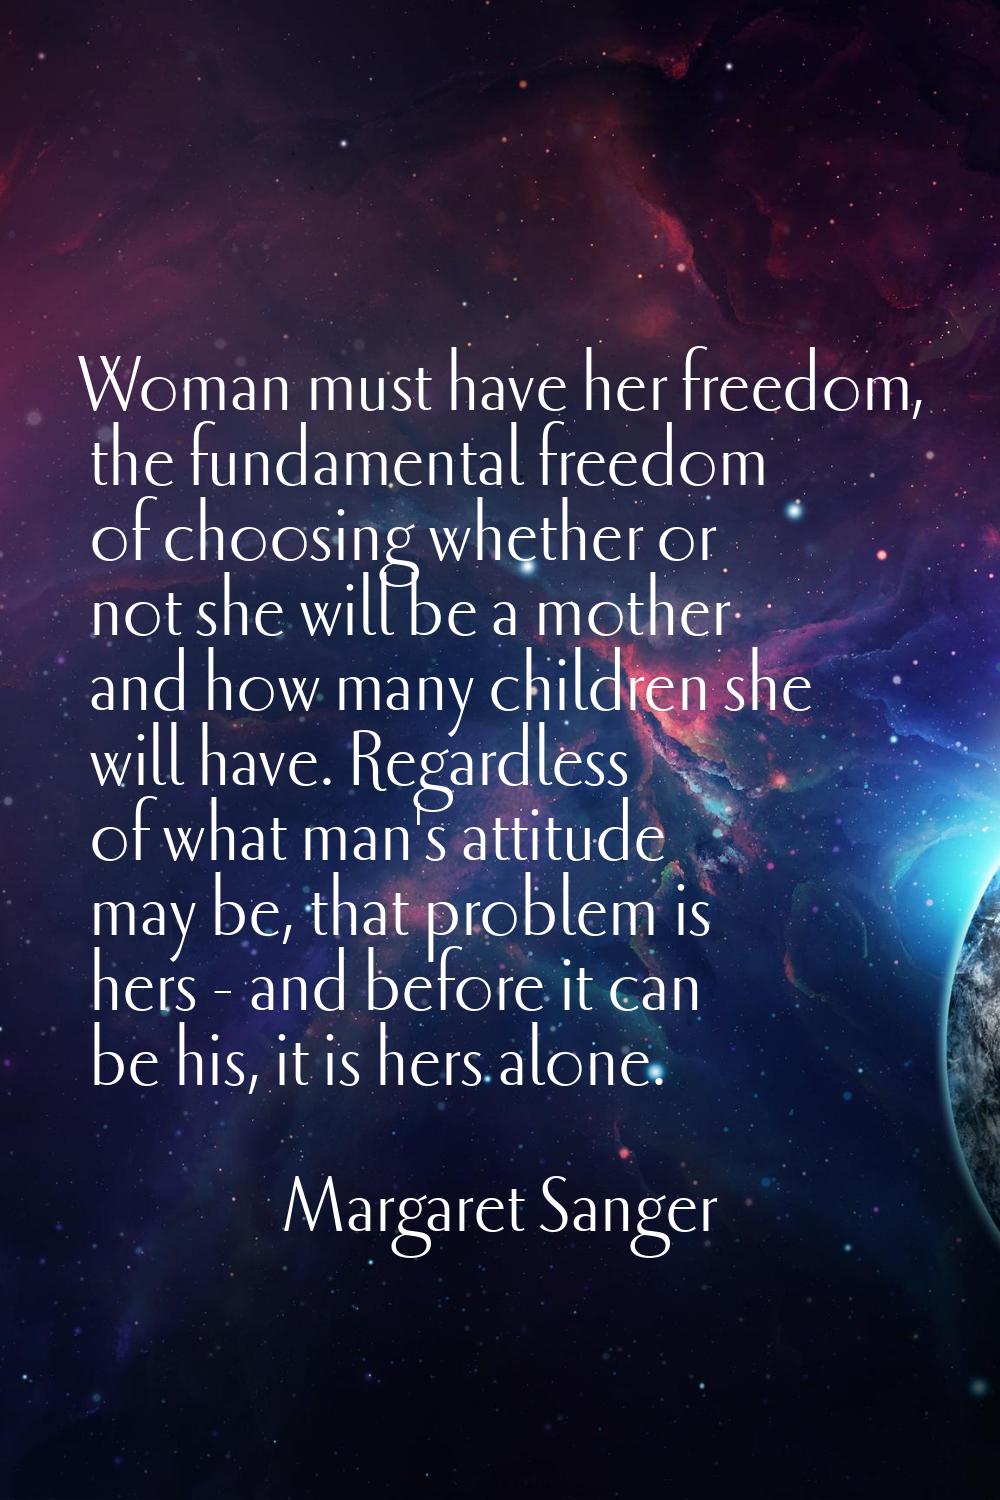 Woman must have her freedom, the fundamental freedom of choosing whether or not she will be a mothe